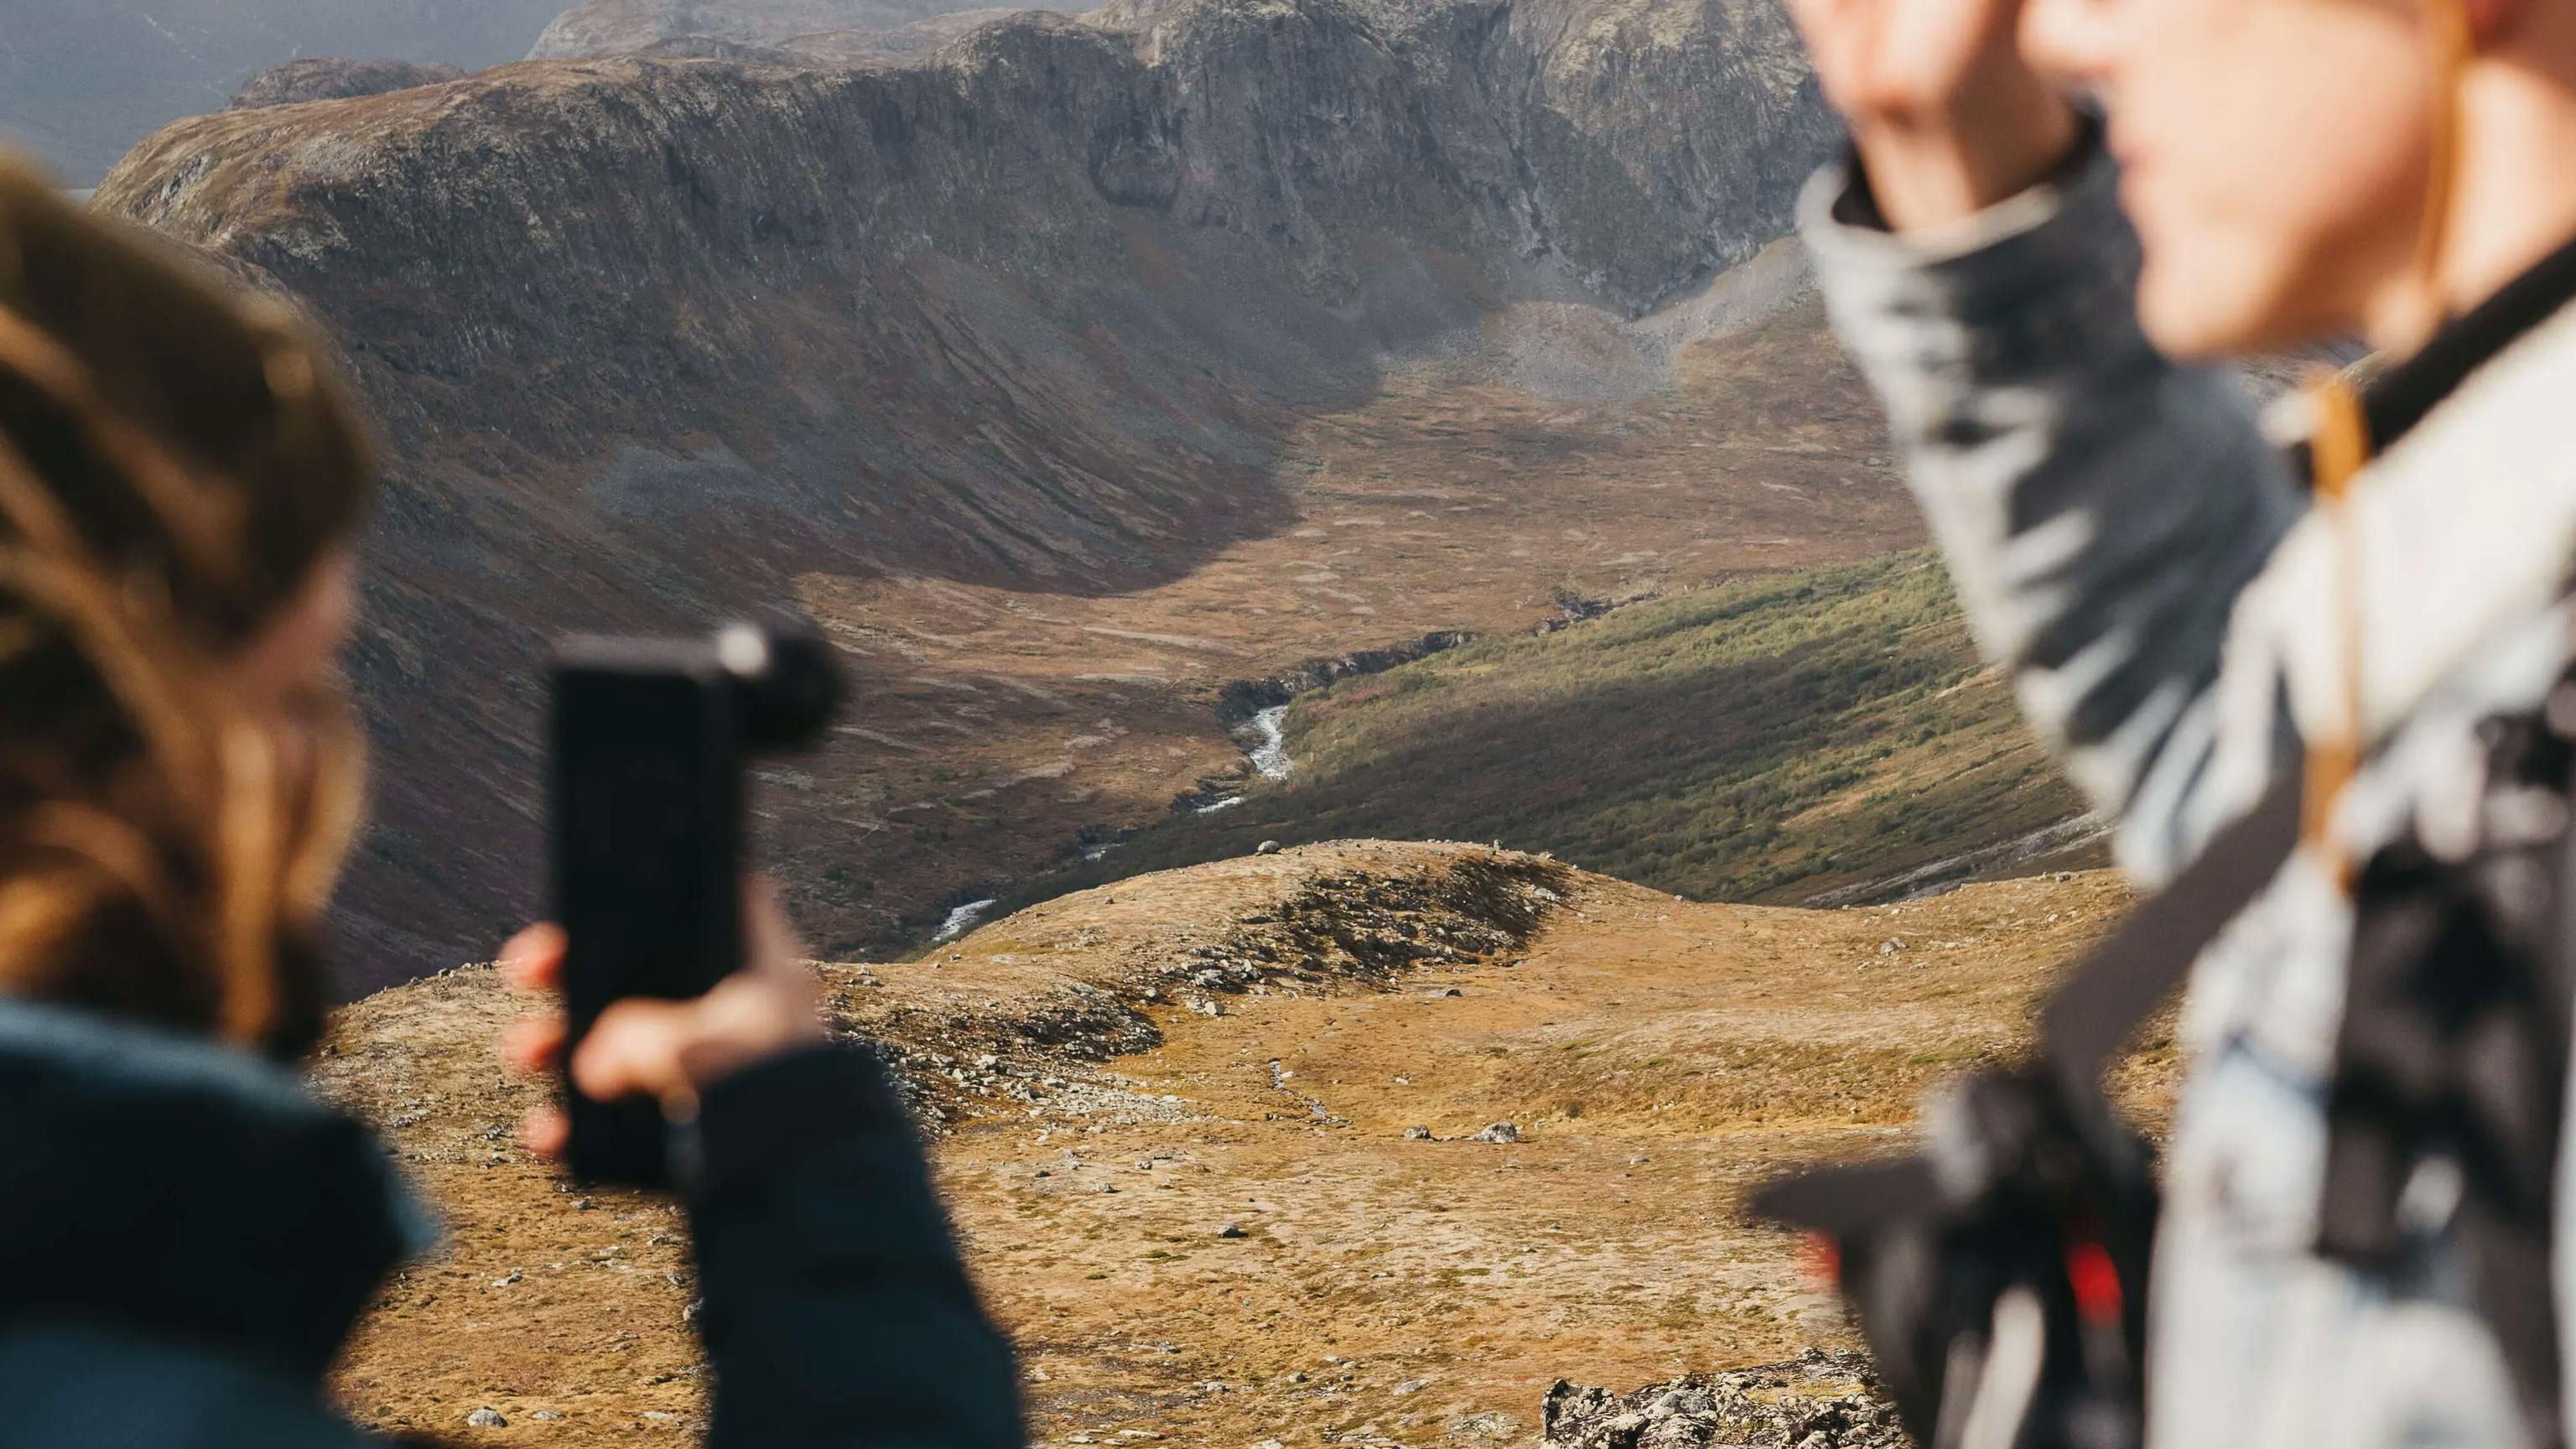 Photogaraphers using moment gear to capture a photo of a mountain range